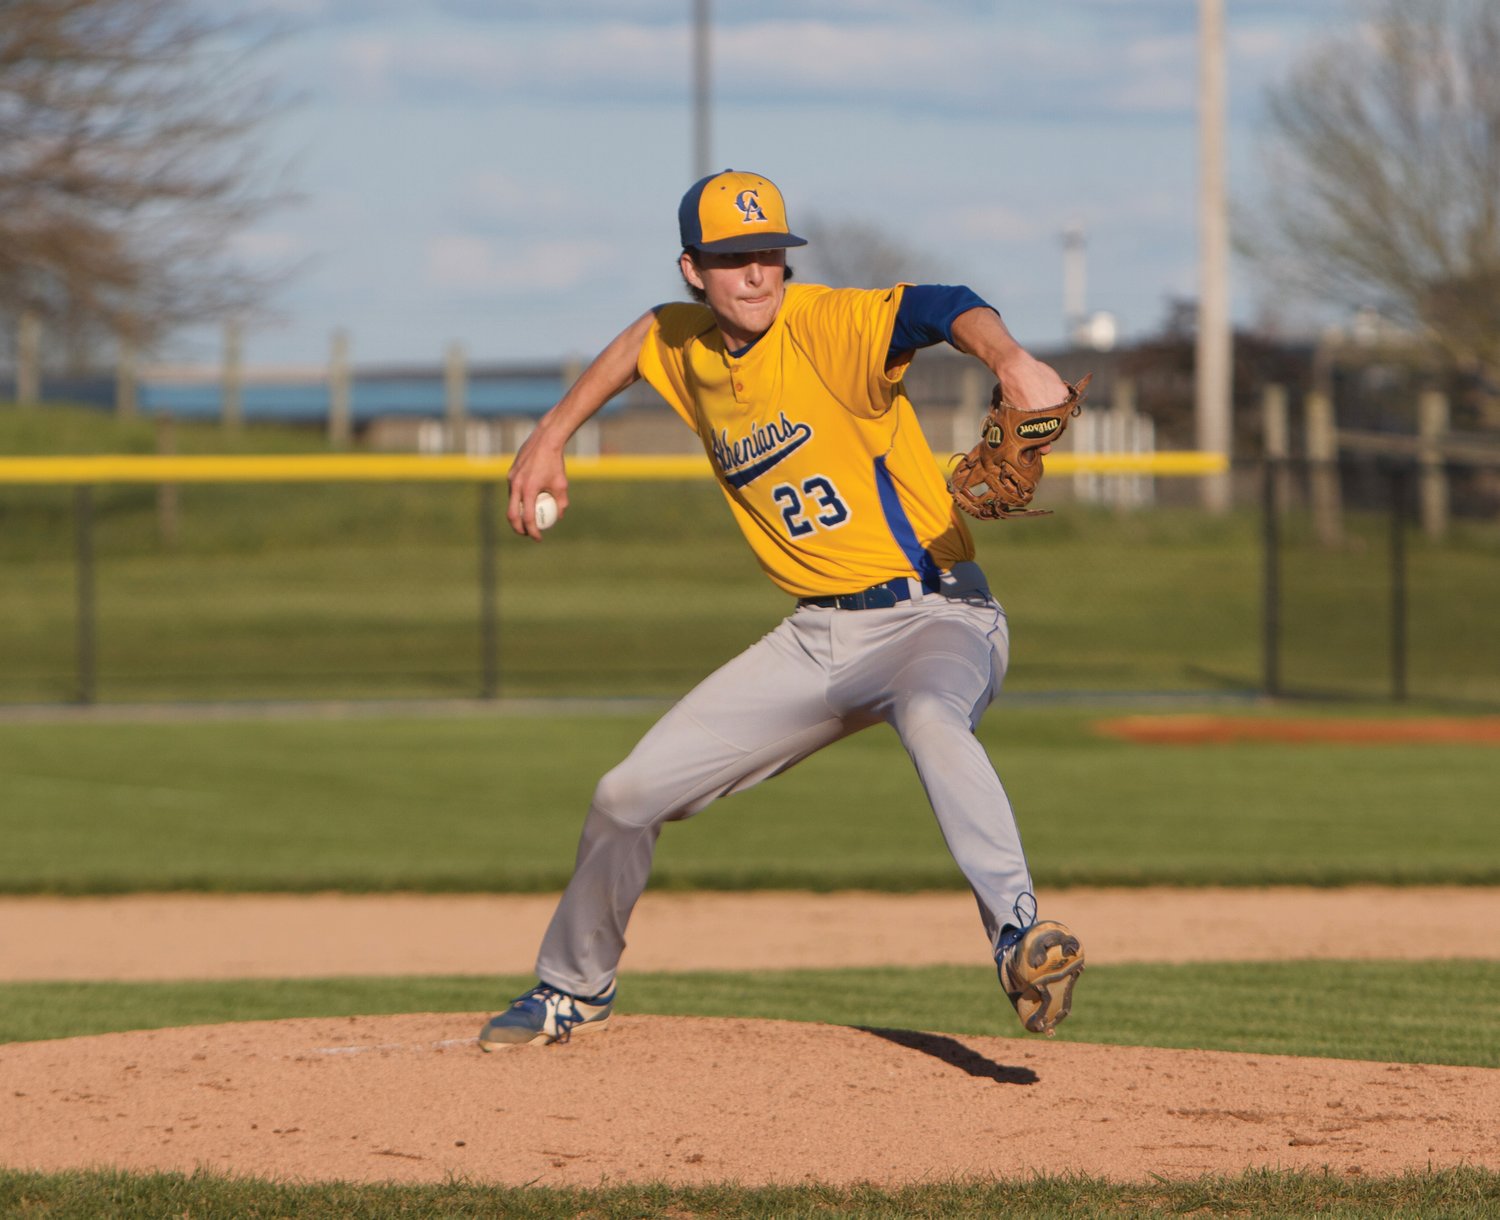 Crawfordsville's Caleb Coons took the ball for the Athenians on Wednesday night.